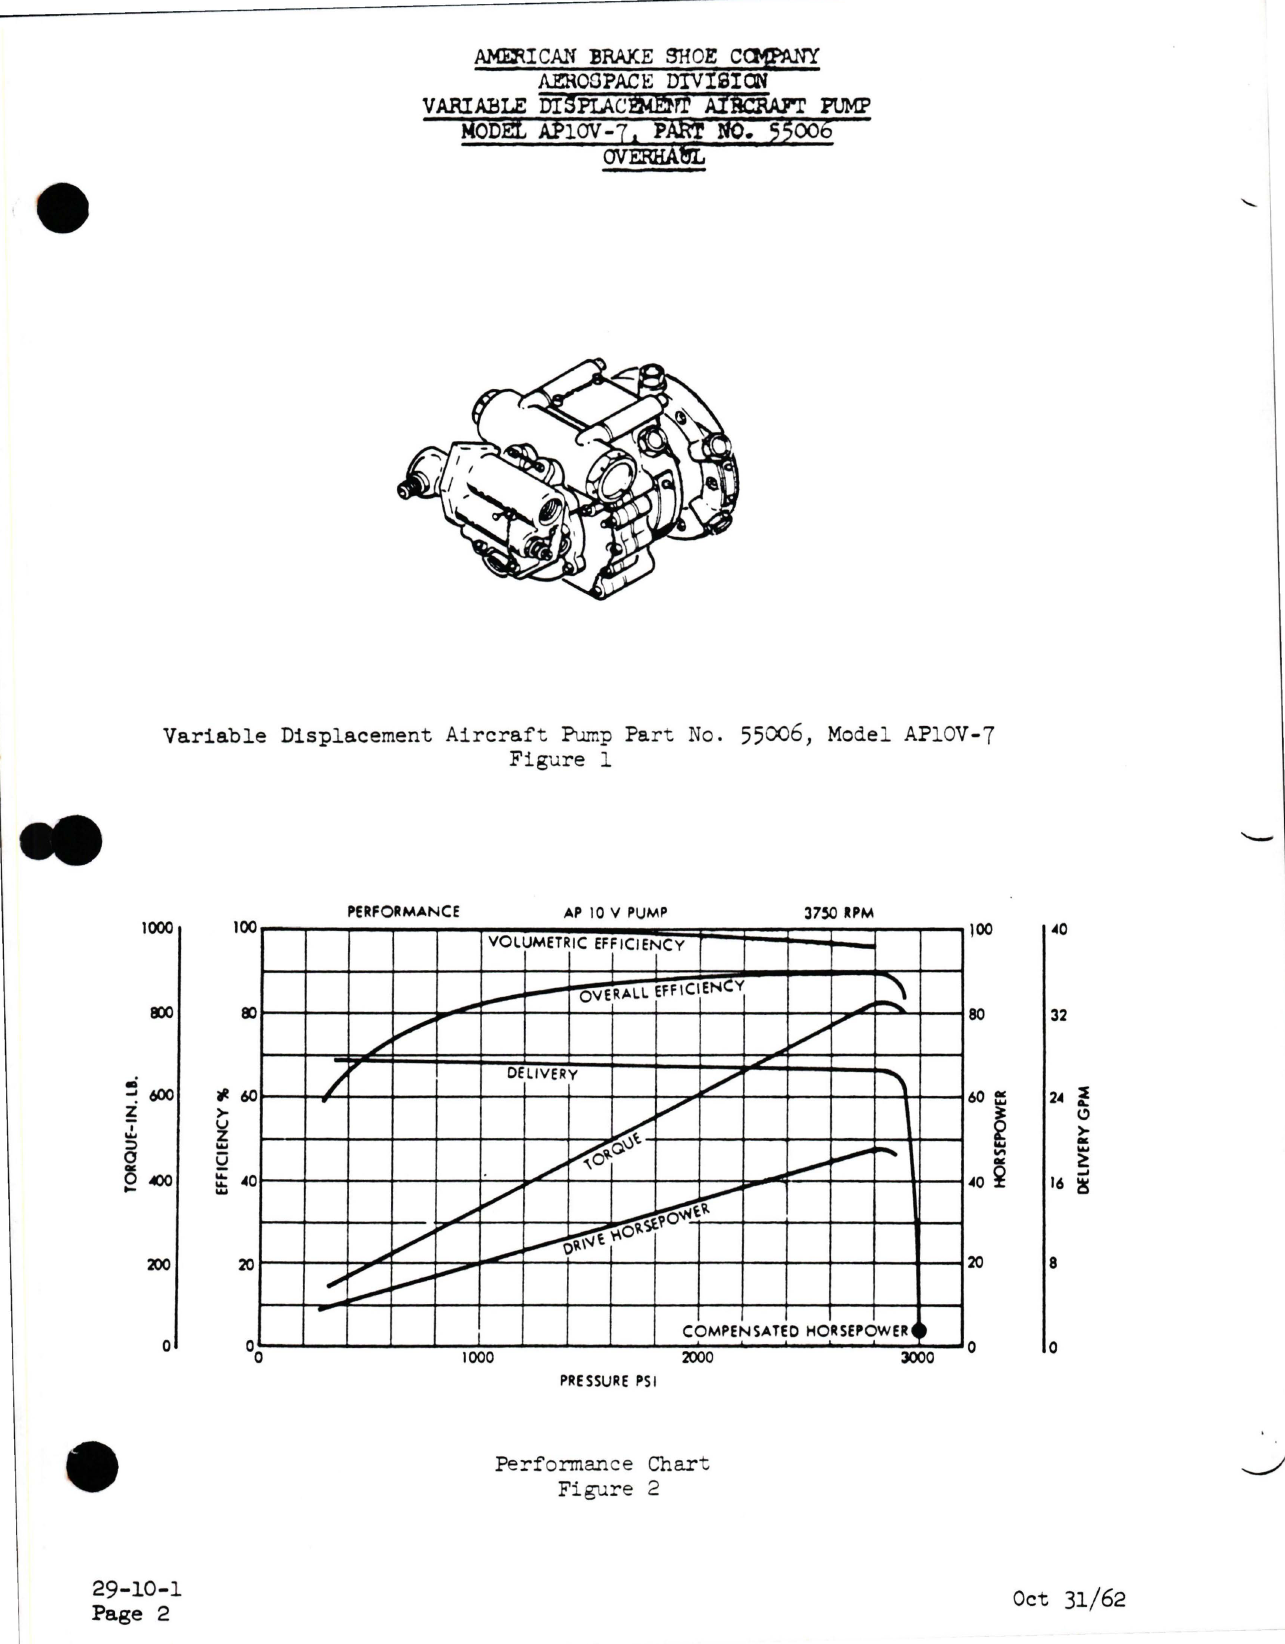 Sample page 5 from AirCorps Library document: Overhaul Manual for Variable Displacement Pumps - Parts 55006, 55028, 55035, and 65001